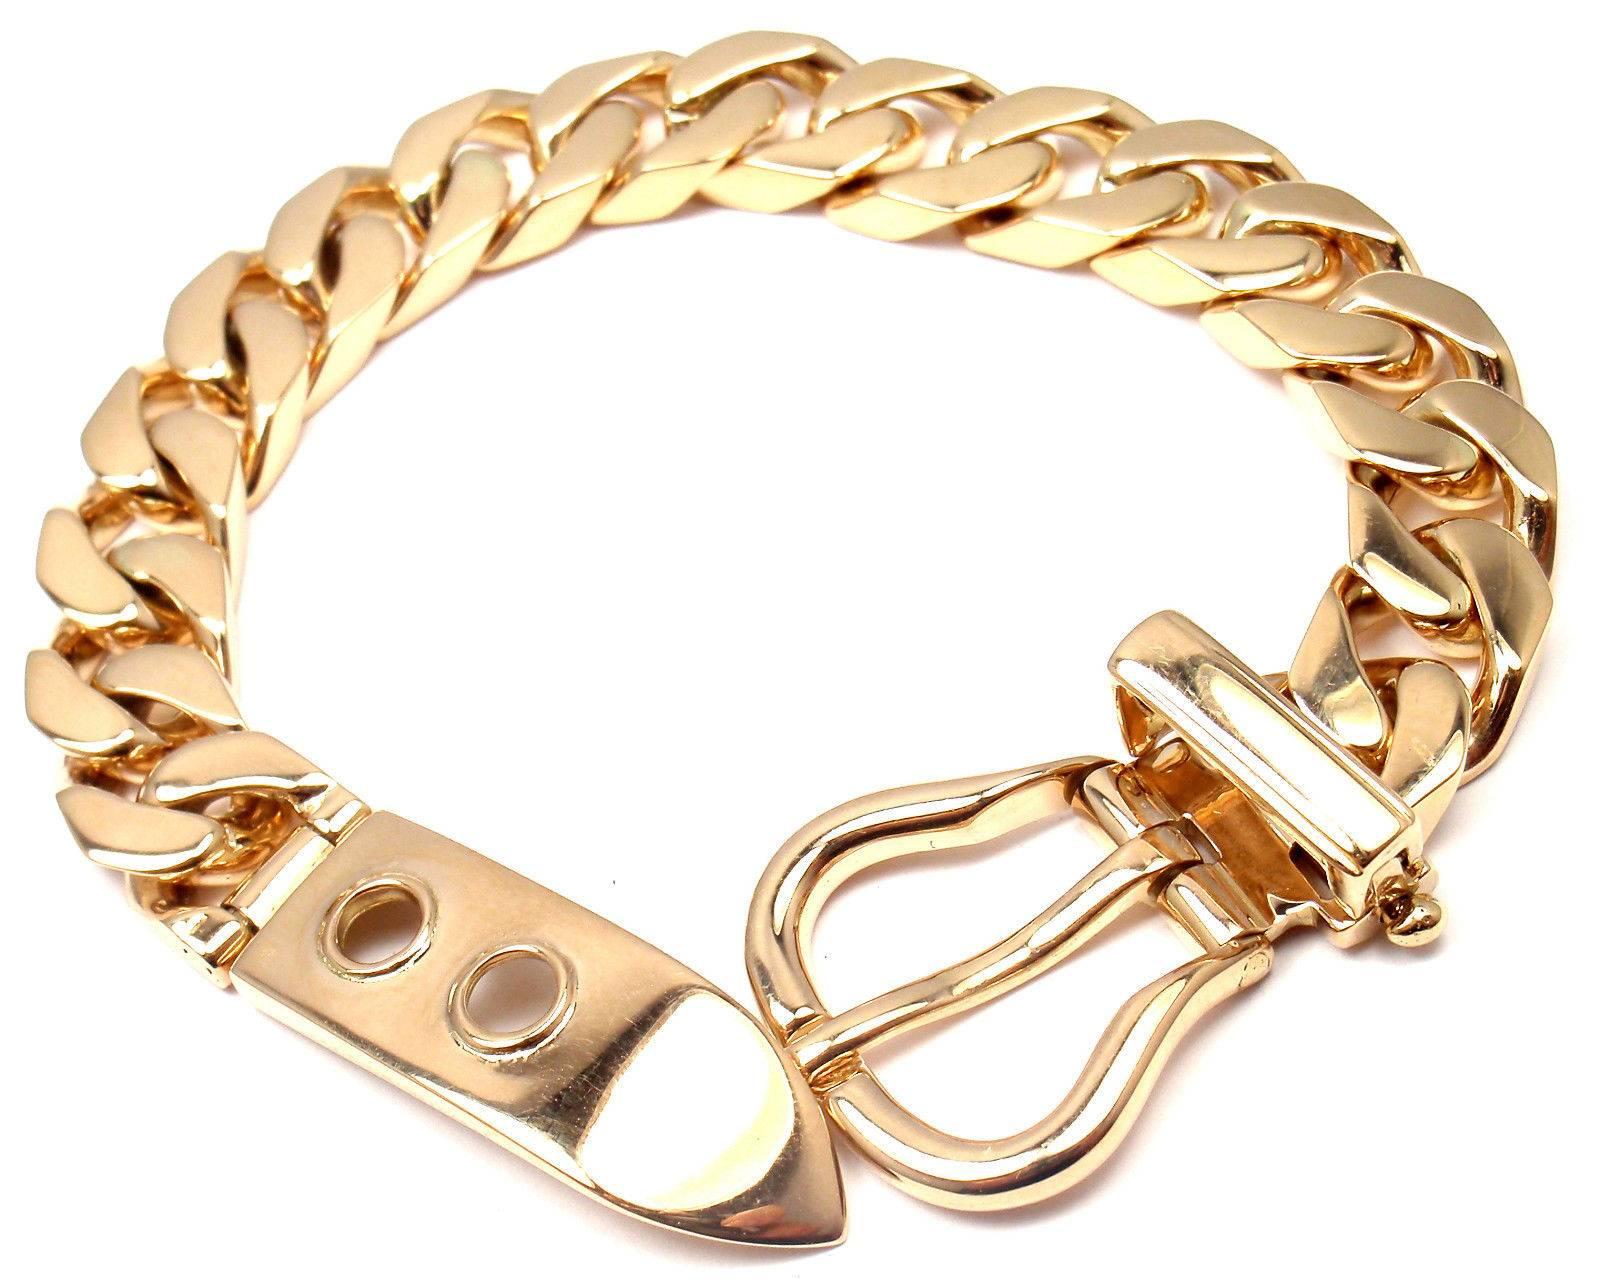 18k Yellow Gold Curb Link Chain Large Buckle Bracelet by Hermes. 

Details: 
Length: 8